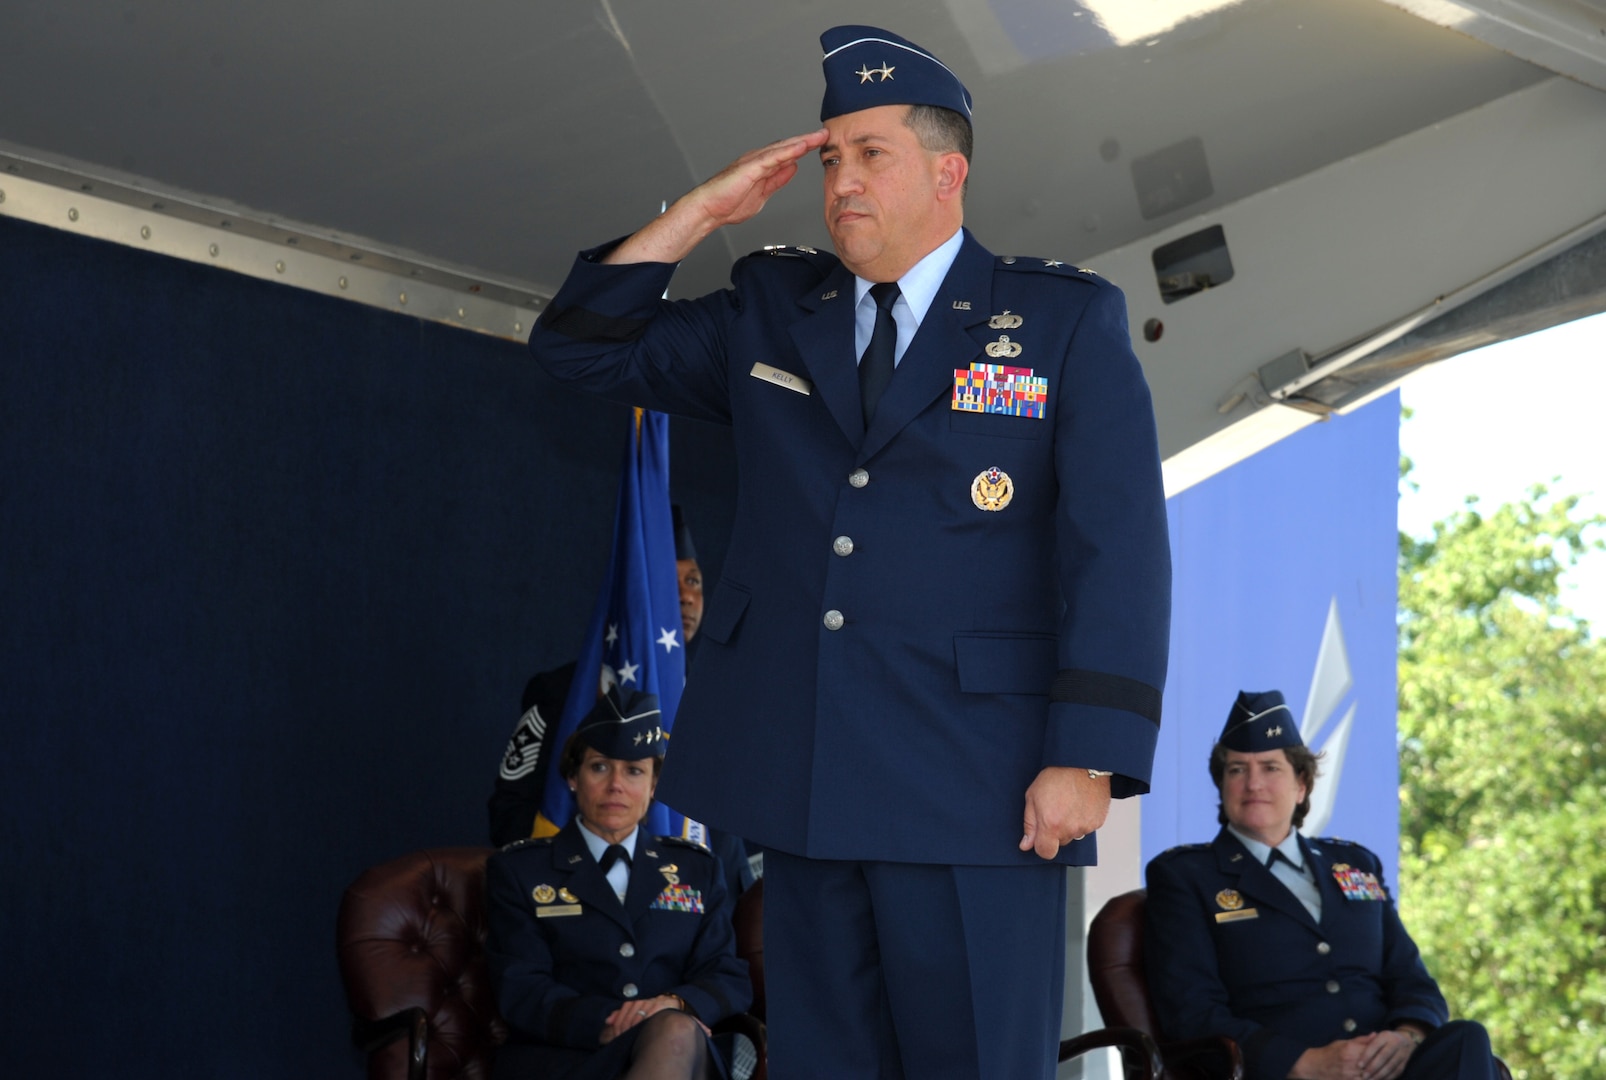 U.S. Air Force Maj. Gen. Brian Kelly, Air Force Personnel Center commander, renders his first salute to a formation representing the AFPC team during an official change of command ceremony June 23 at Joint Base San Antonio-Randolph, Texas. Kelly assumed this role as Maj. Gen. Peggy Poore formally relinquished command after several years of dedicated service.